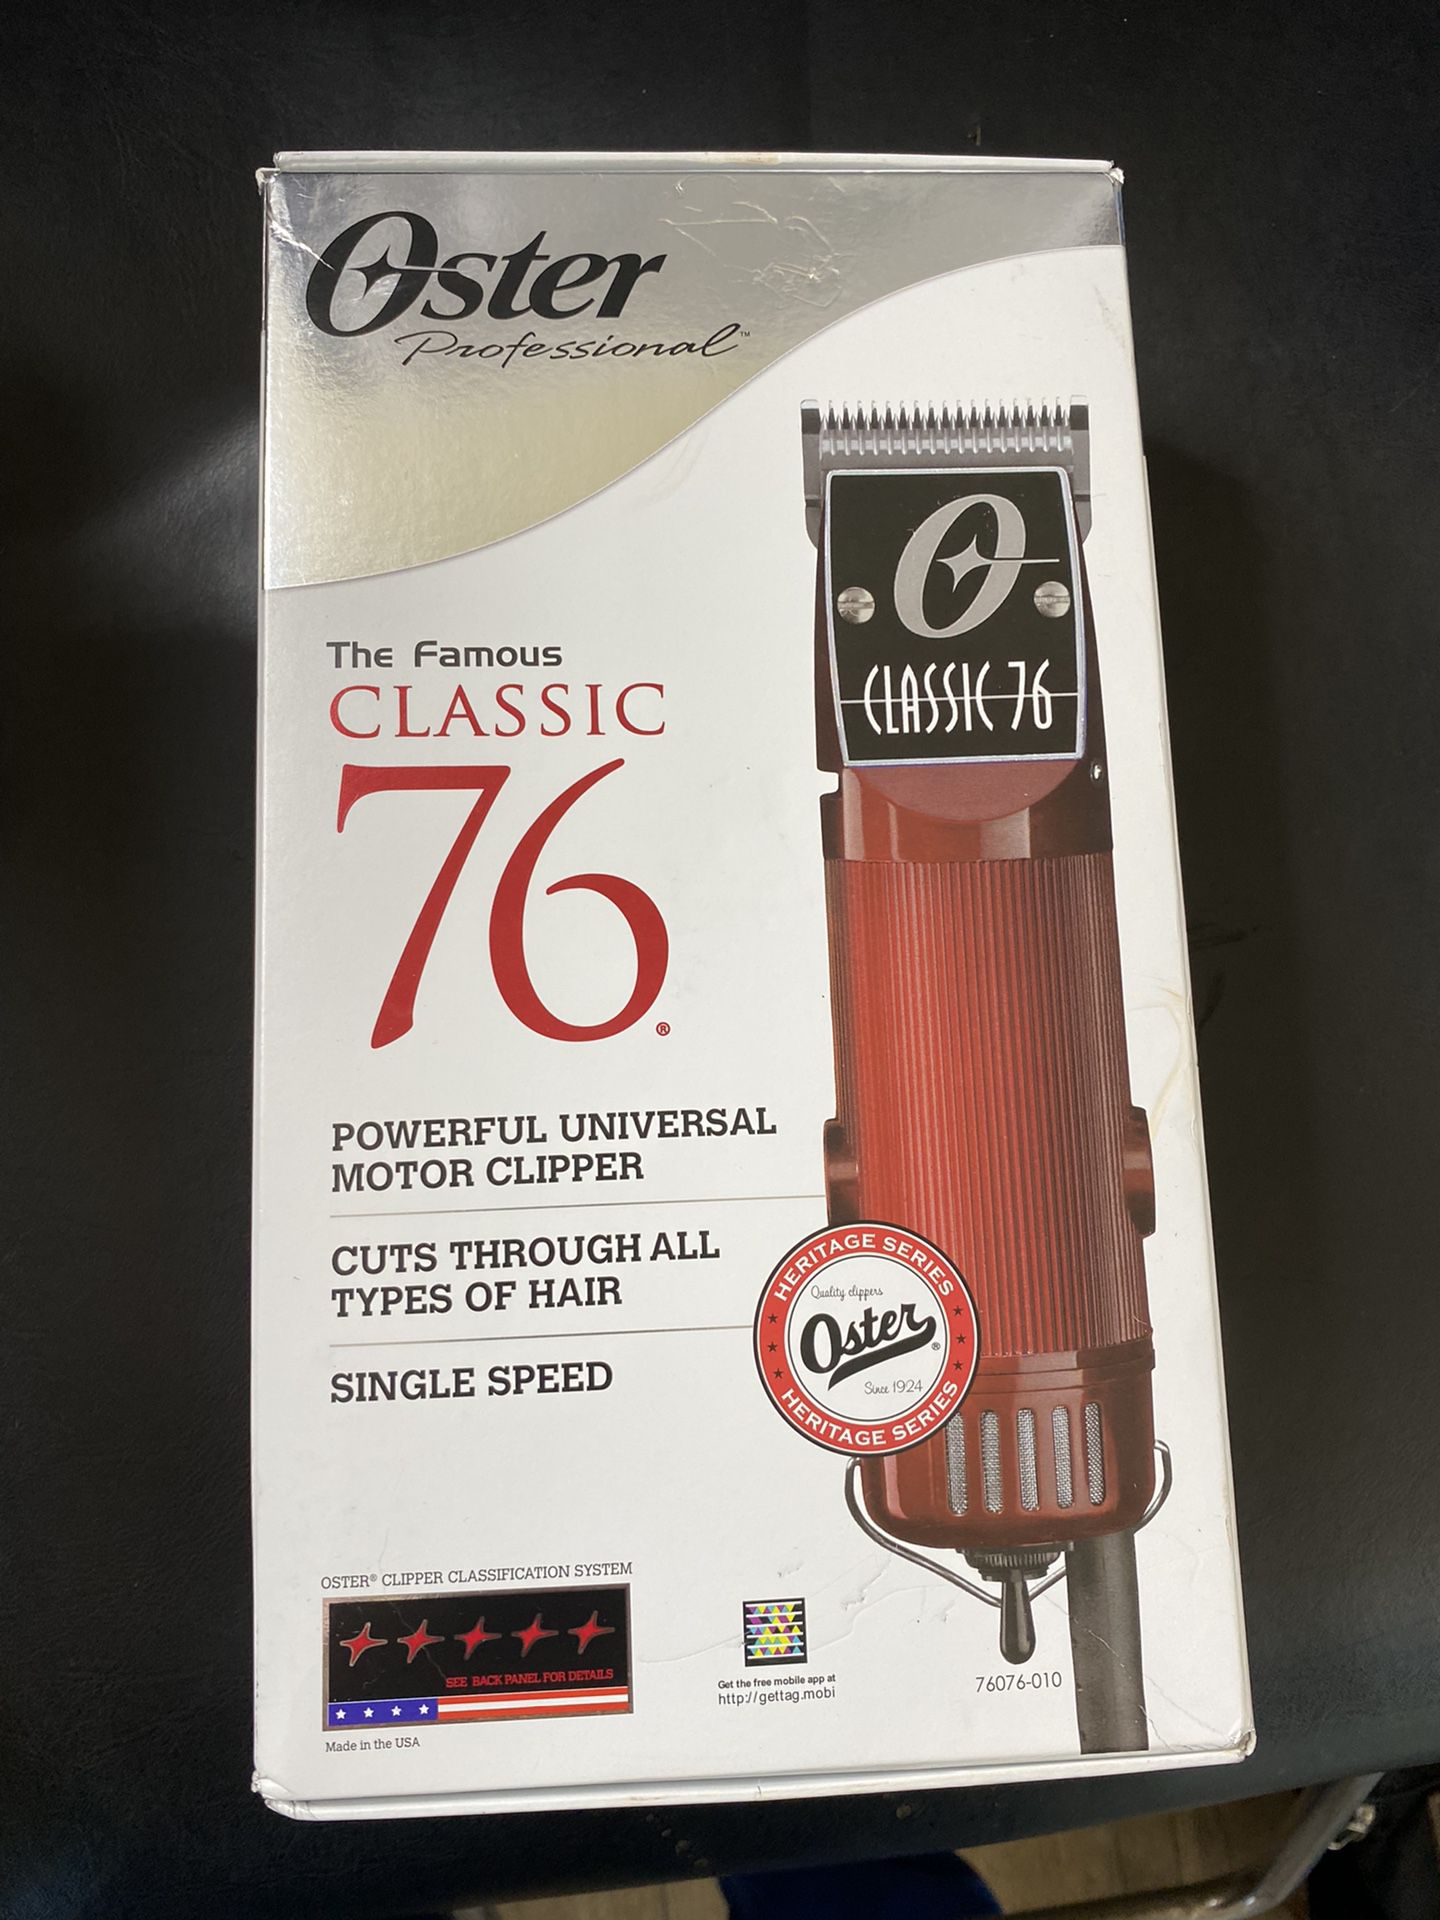 Oster classic 76 Barber Clippers